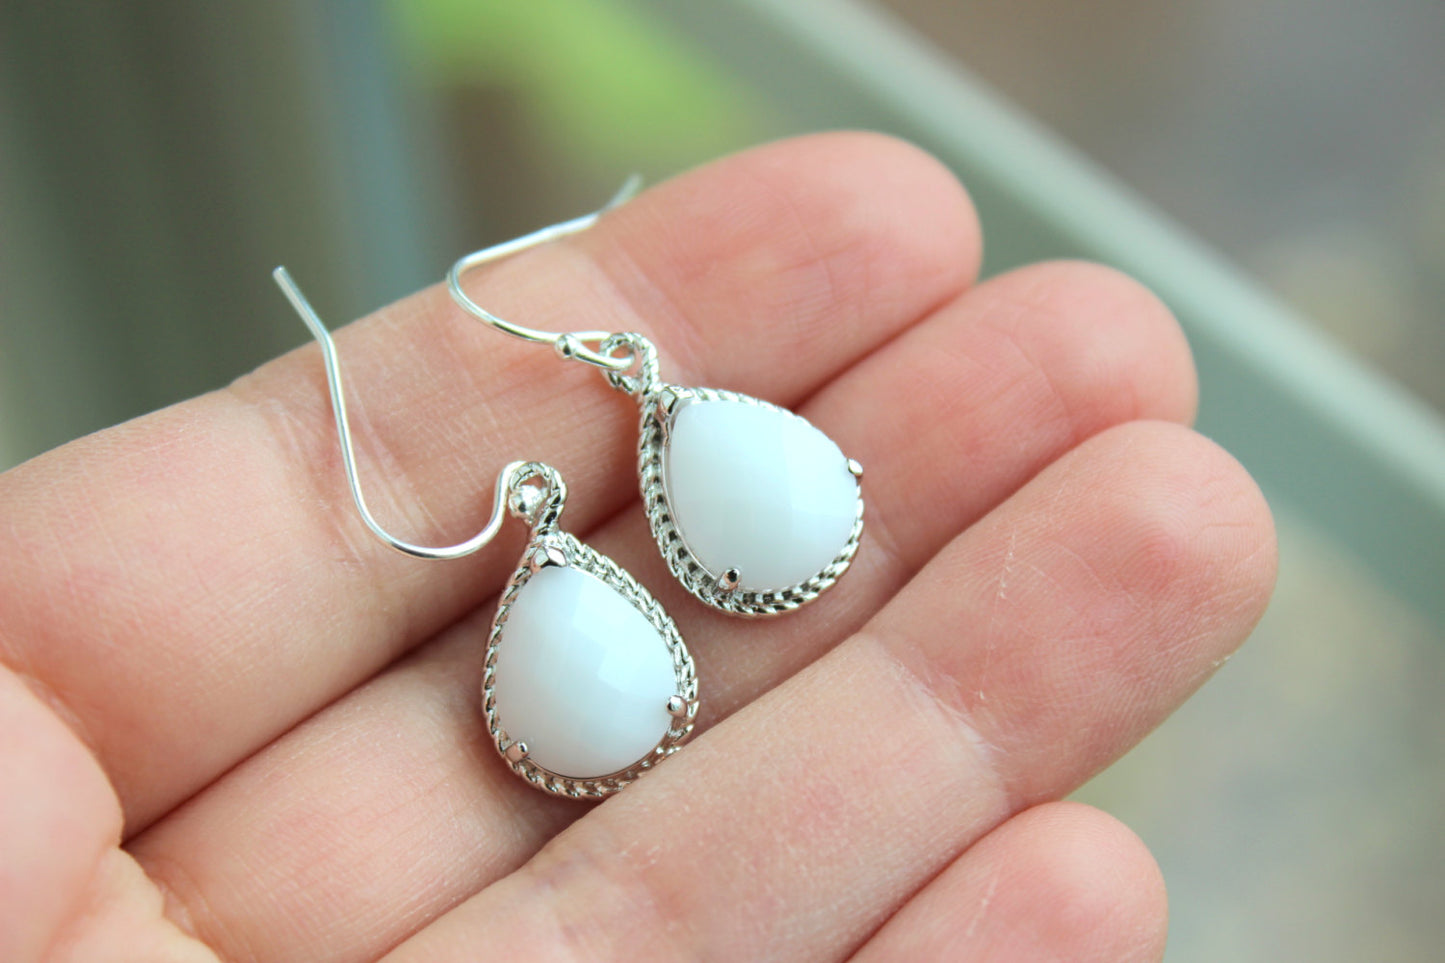 Silver White Opal Earrings White Wedding Jewelry Bridesmaid Earrings Gift White Opal Cream Bridal Jewelry Personalized Gift Under 25